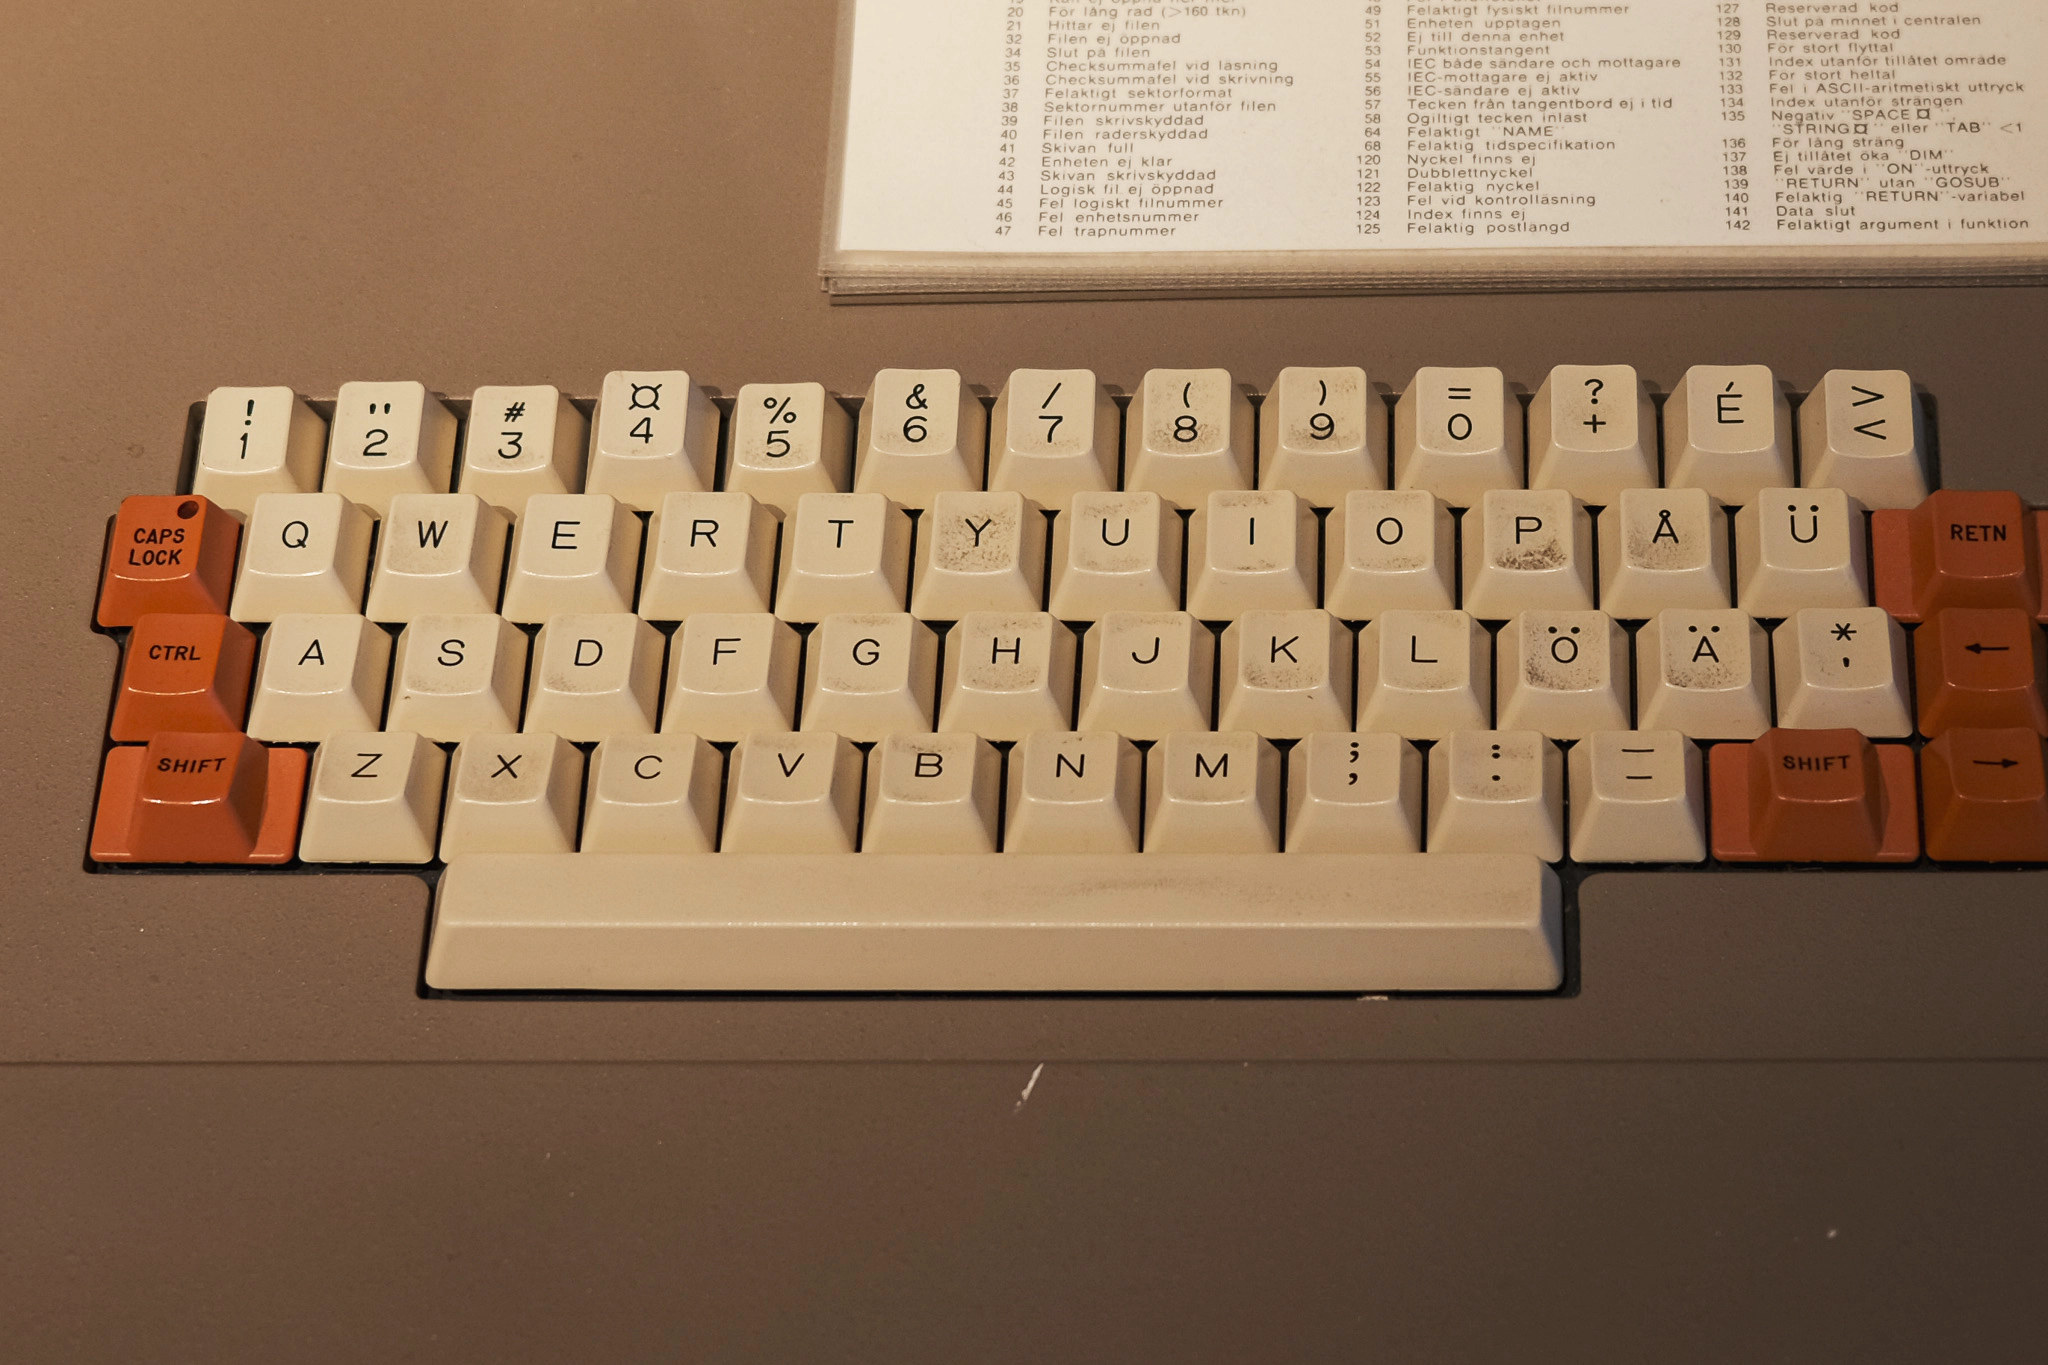 A photograph of an old keyboard